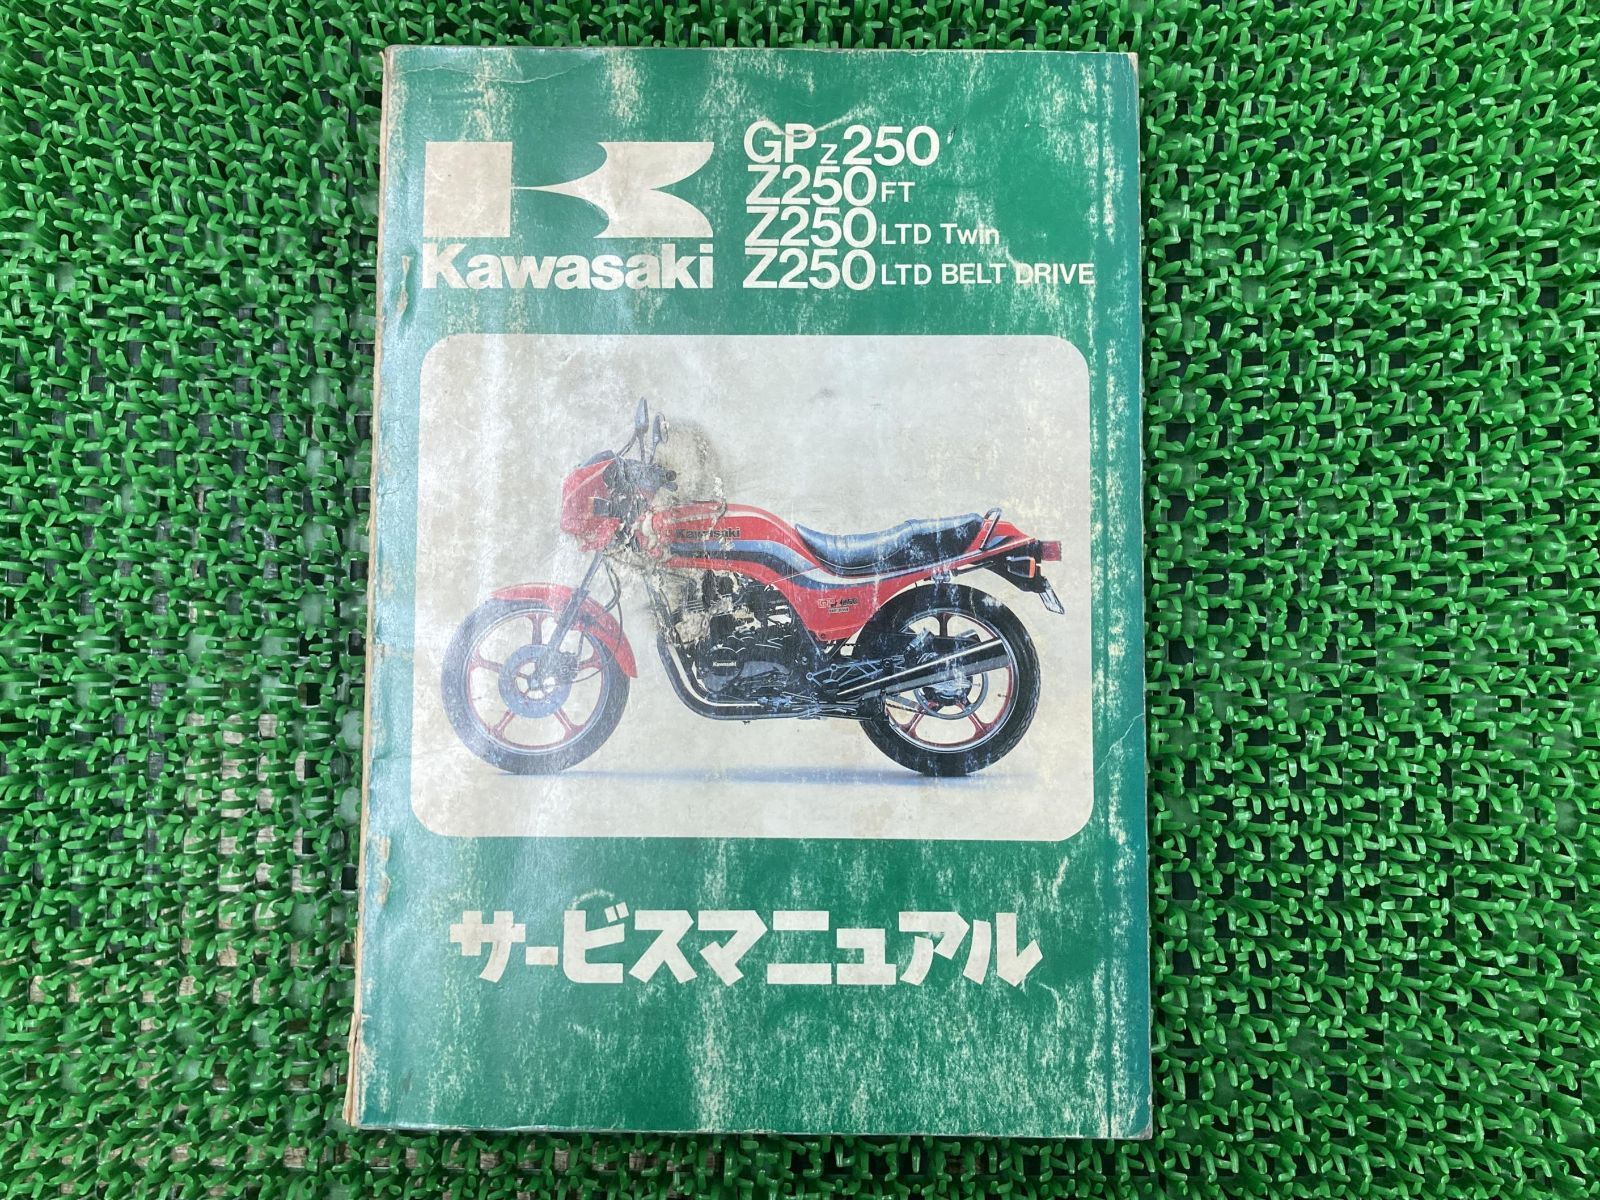 GPz250 Z250FT Z250LTDTwin Z250LTDBELTDRIVE サービスマニュアル 3版 配線図 カワサキ 正規 中古 バイク  整備書 A1 A2 A3 A4 A5 H1